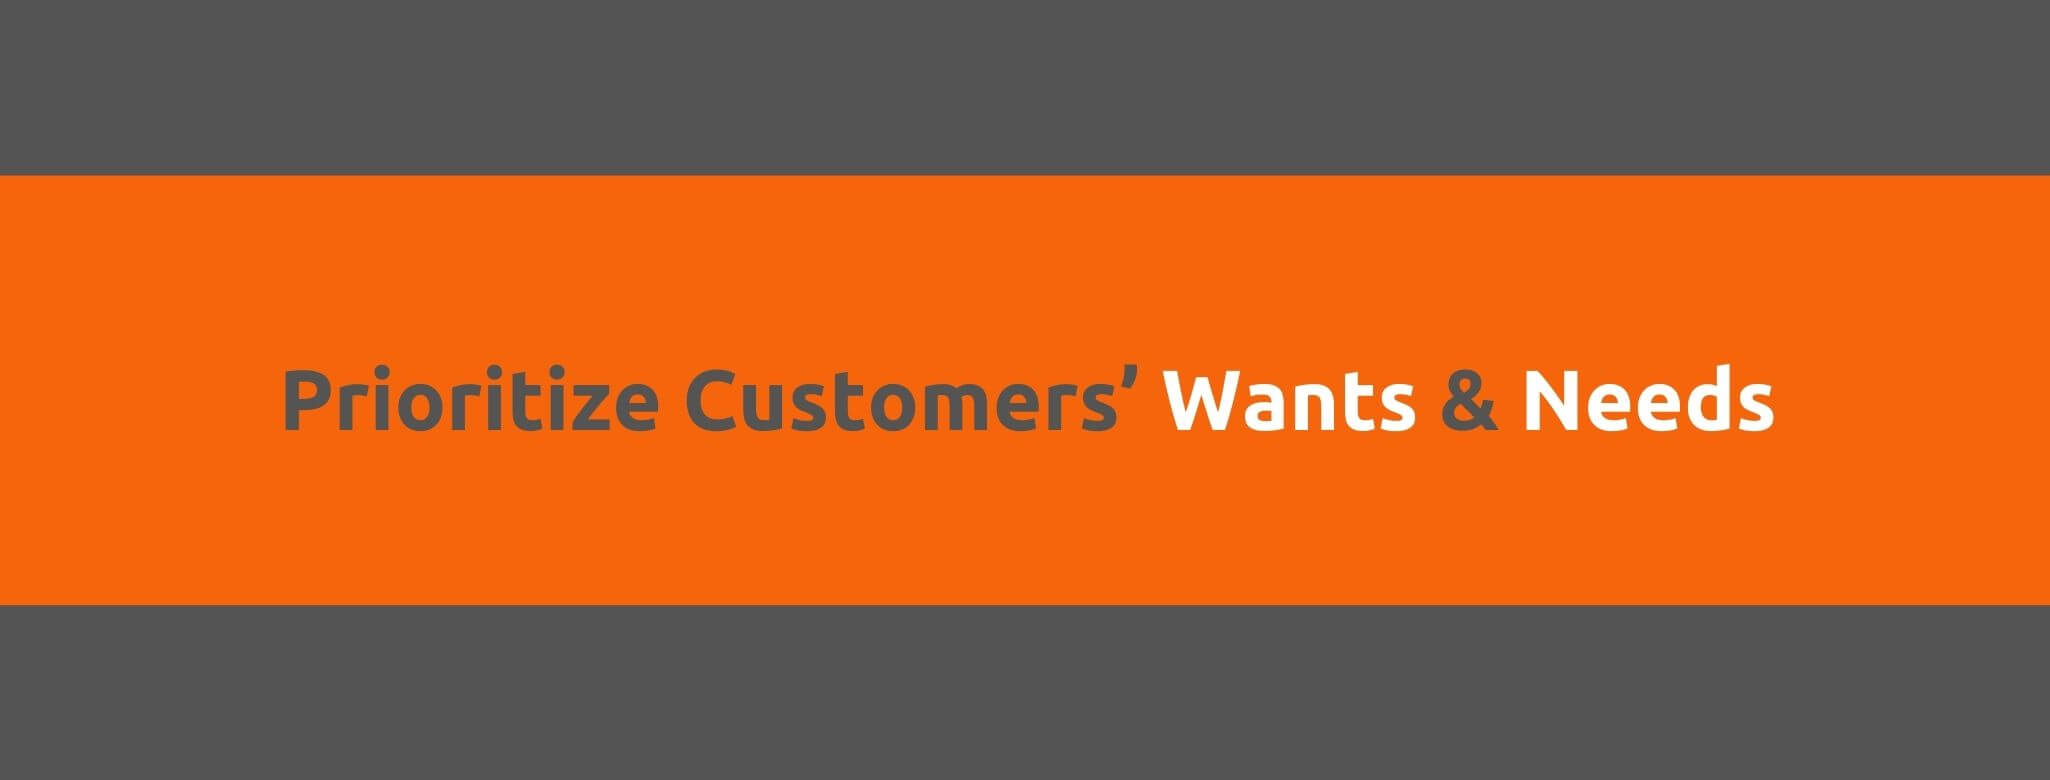 Prioritize Customer's Wants & Needs - 25 Rules for Great Customer Service - Replyco Helpdesk Software for eCommerce